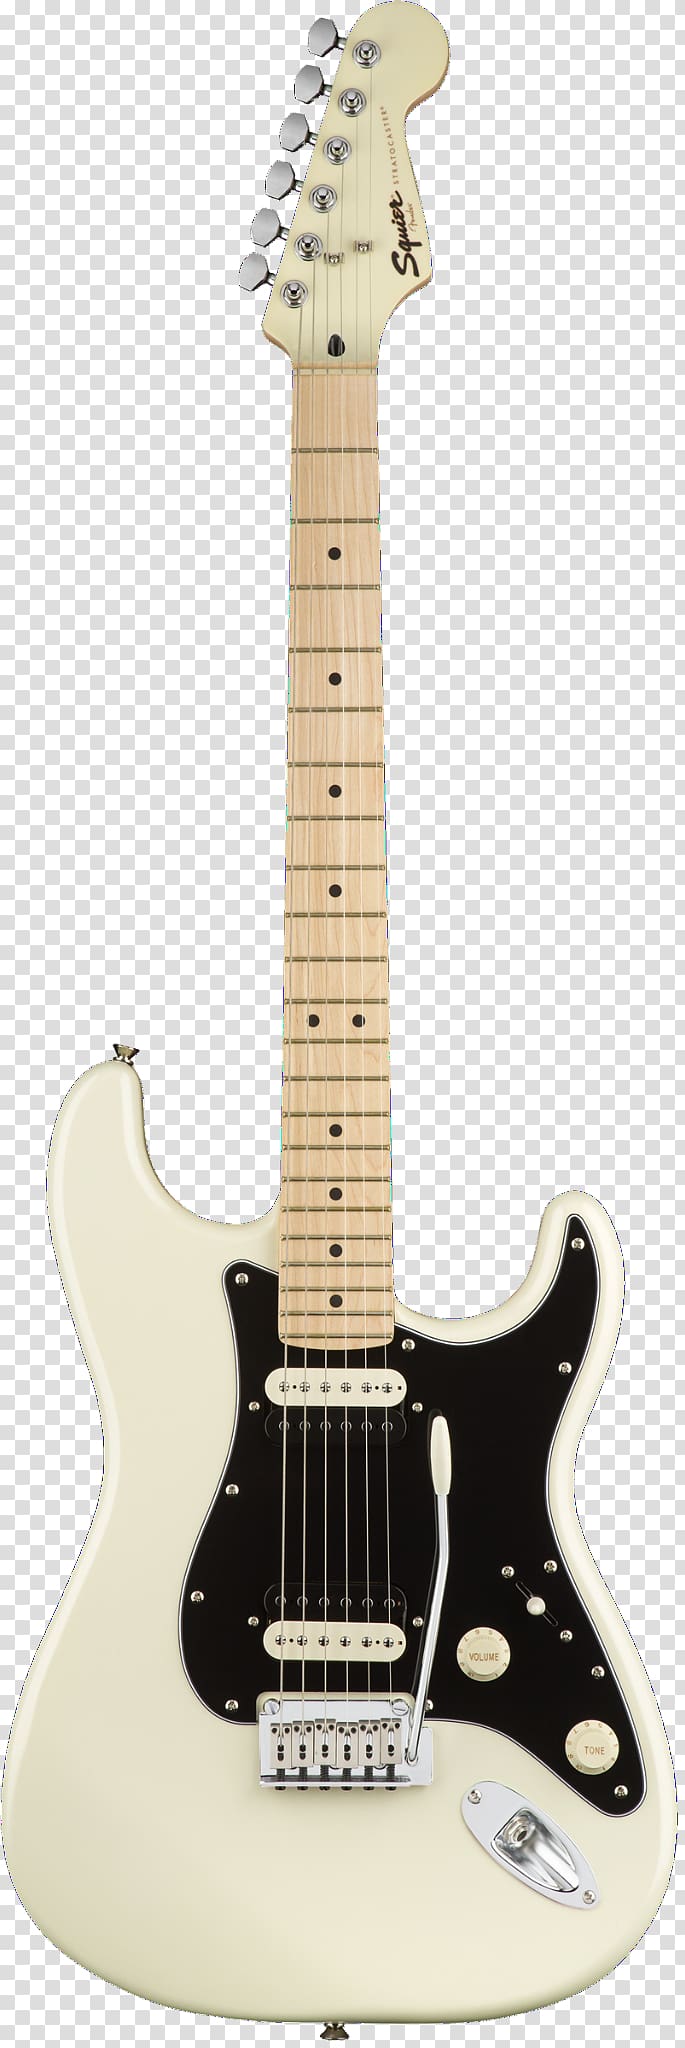 Fender Stratocaster Fender Contemporary Stratocaster Japan Squier Deluxe Hot Rails Stratocaster Fender Telecaster Squier Telecaster, electric guitar transparent background PNG clipart